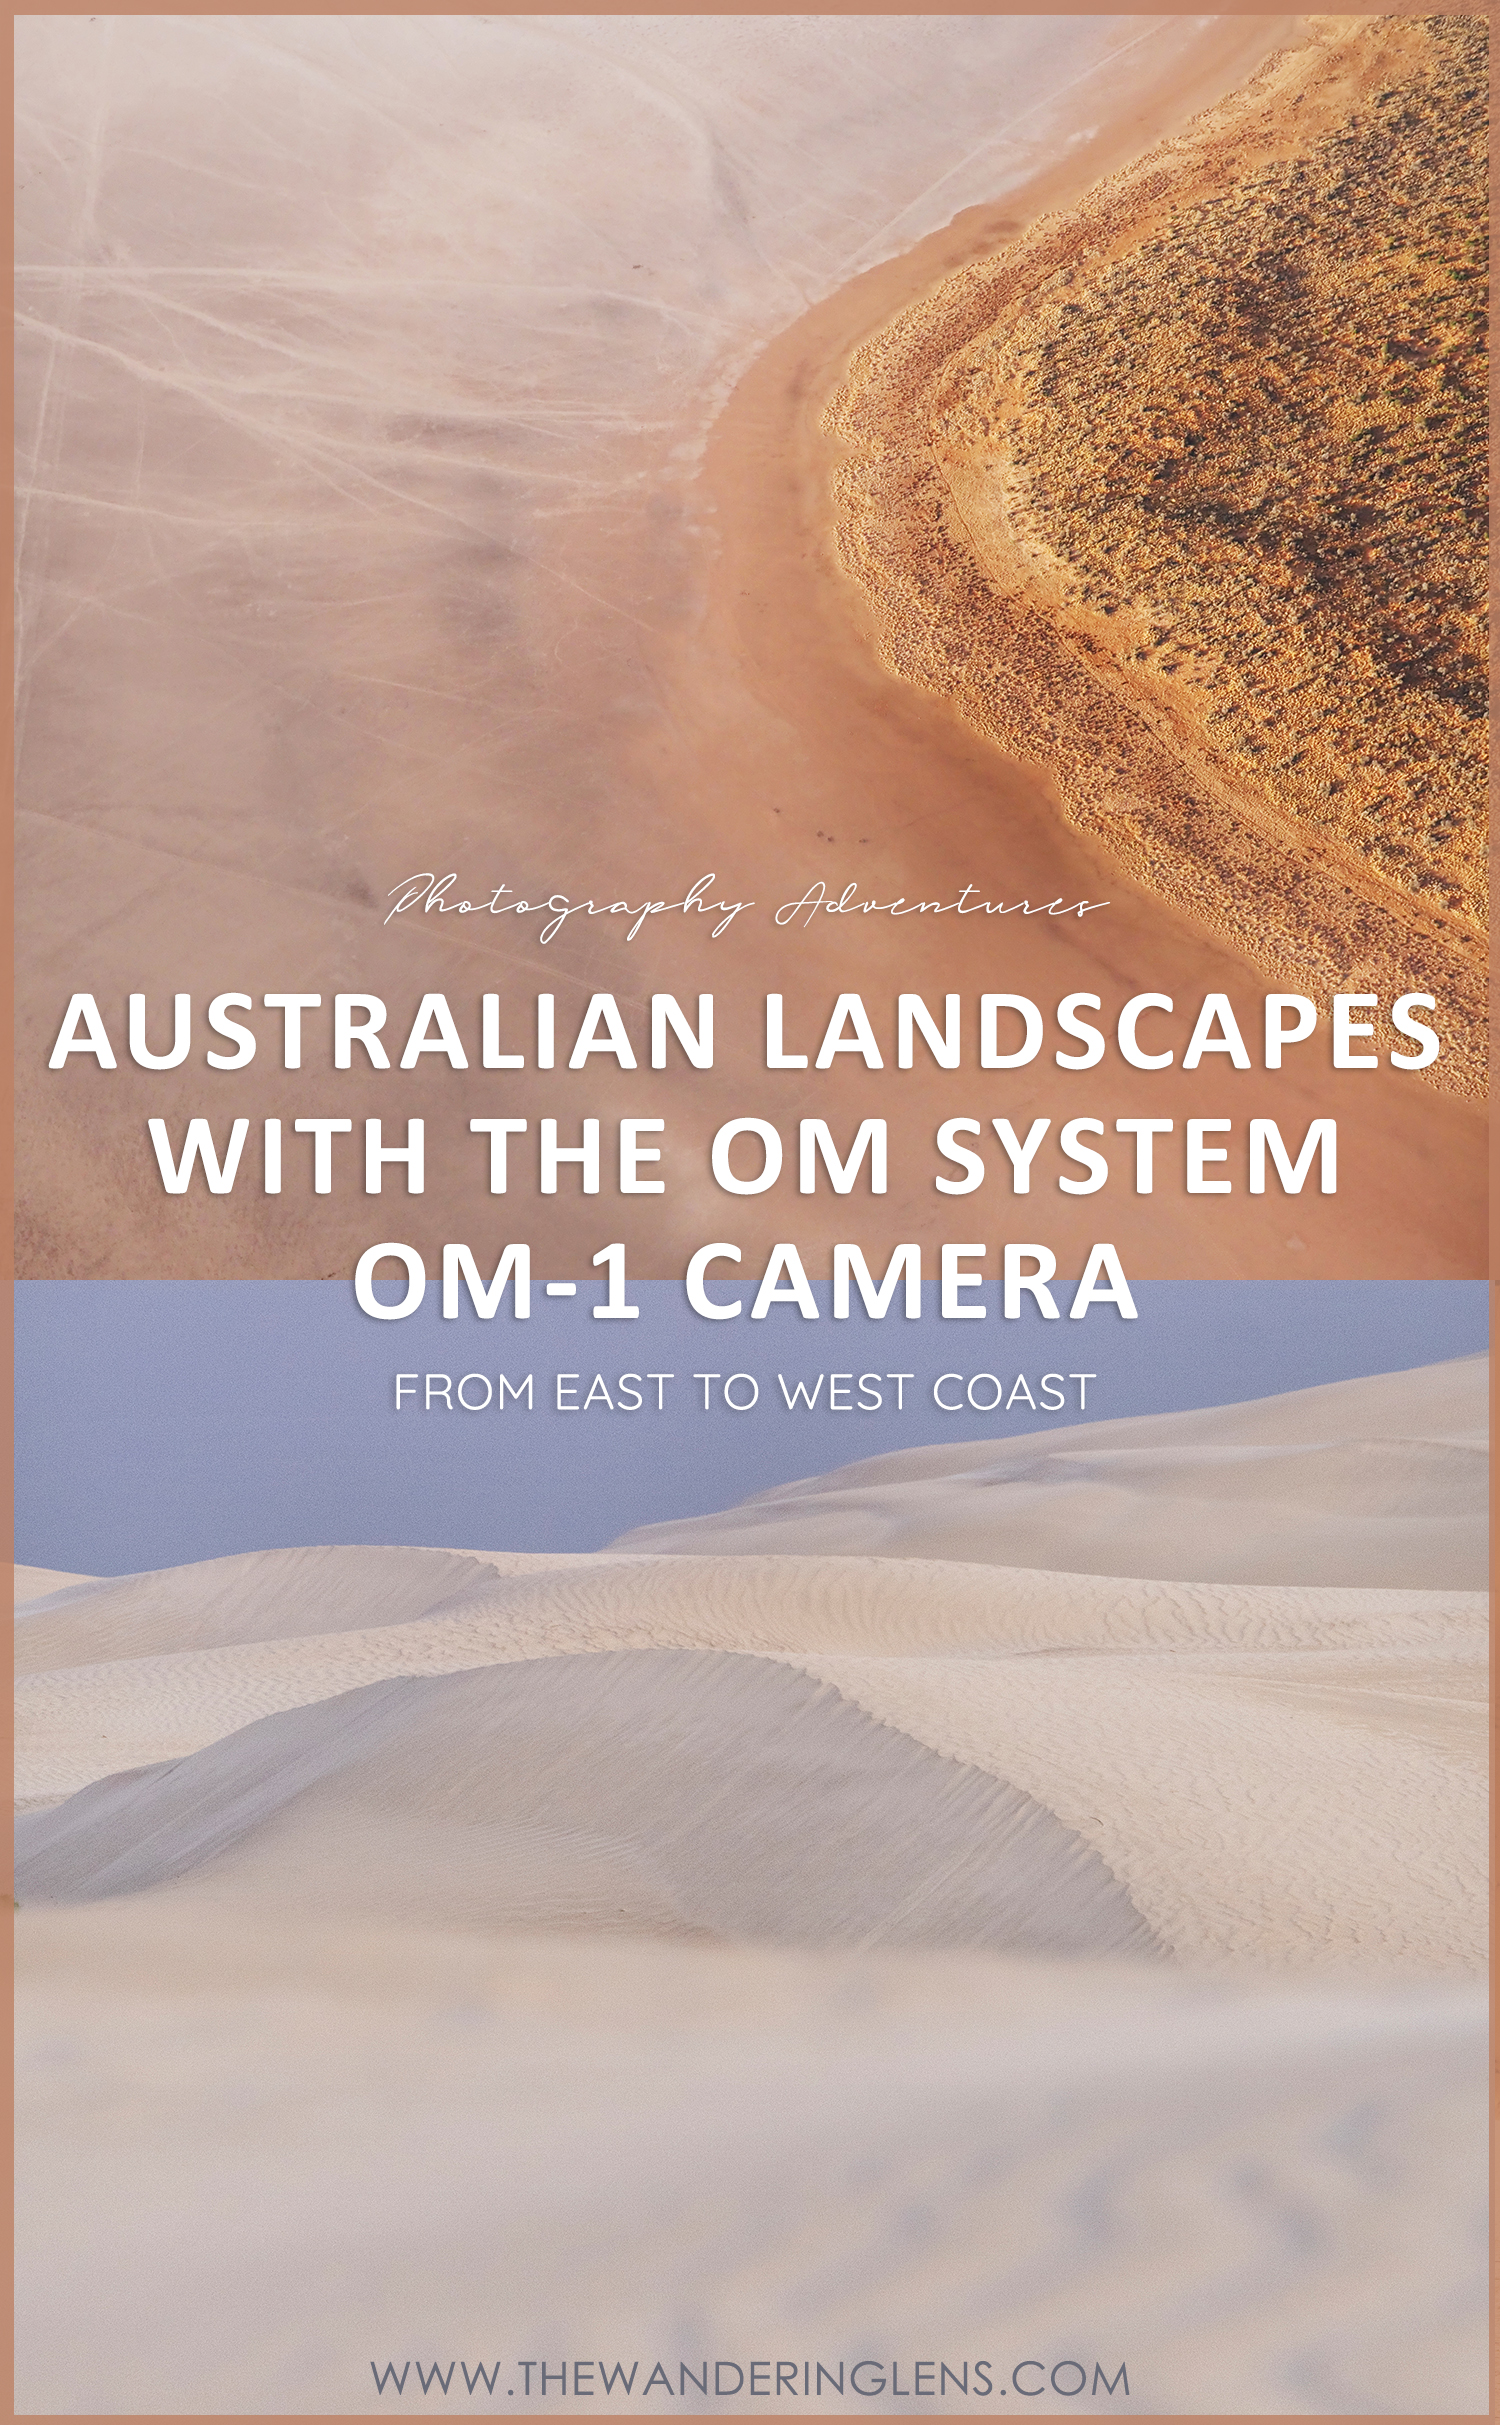 Australian Landscape Photography with the OM-1 OM SYSTEM Mirrorless Camera